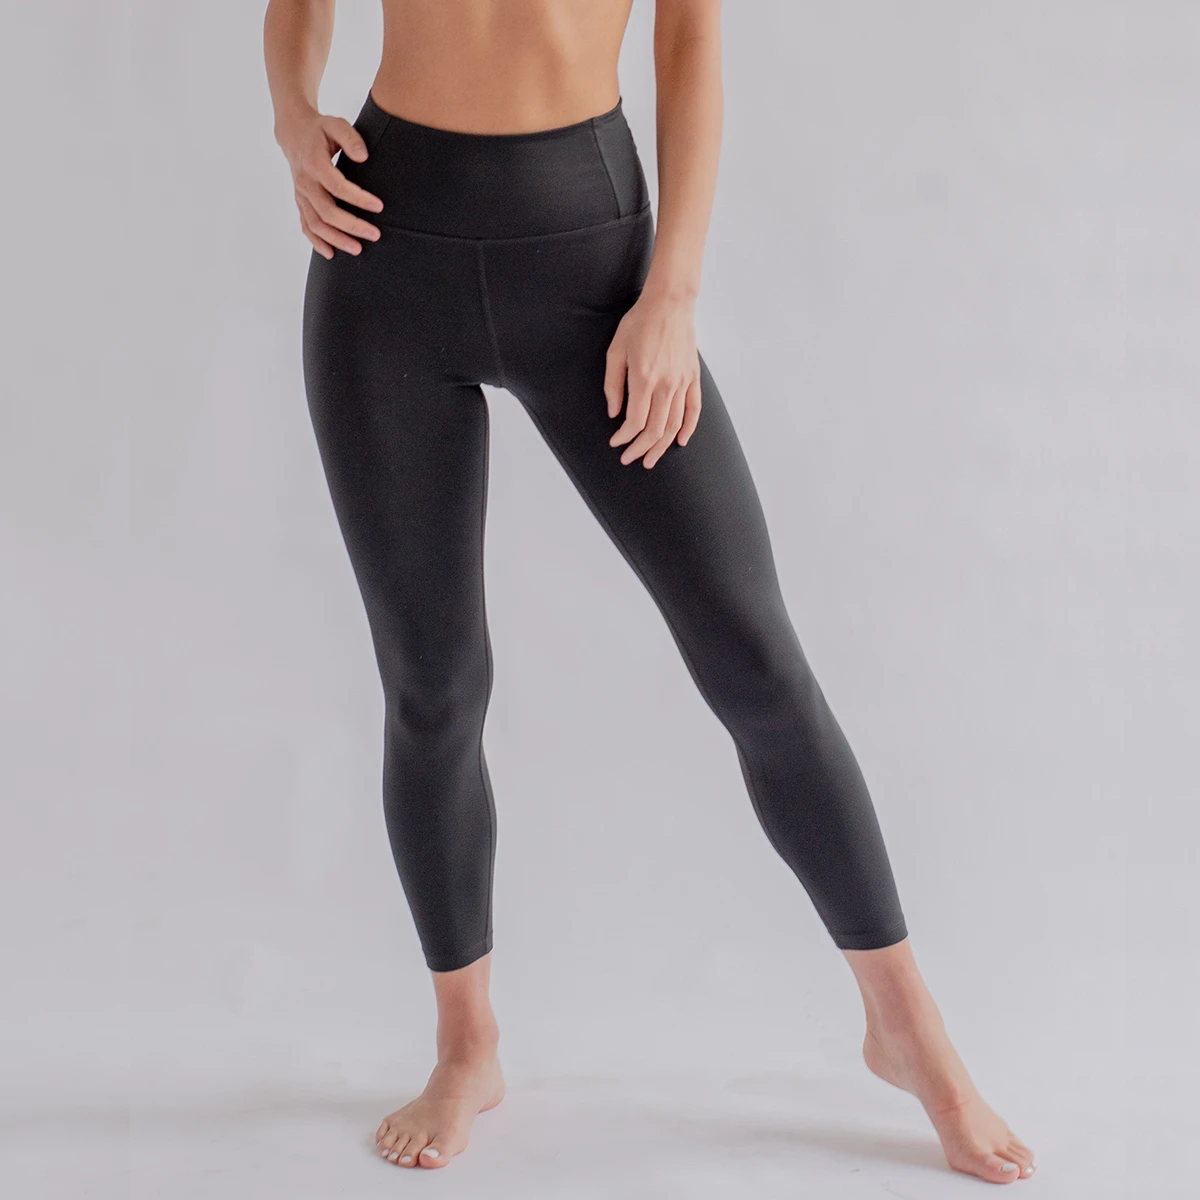 Girlfriend collective Float seamless high rise leggings, black • Price  84.95 €